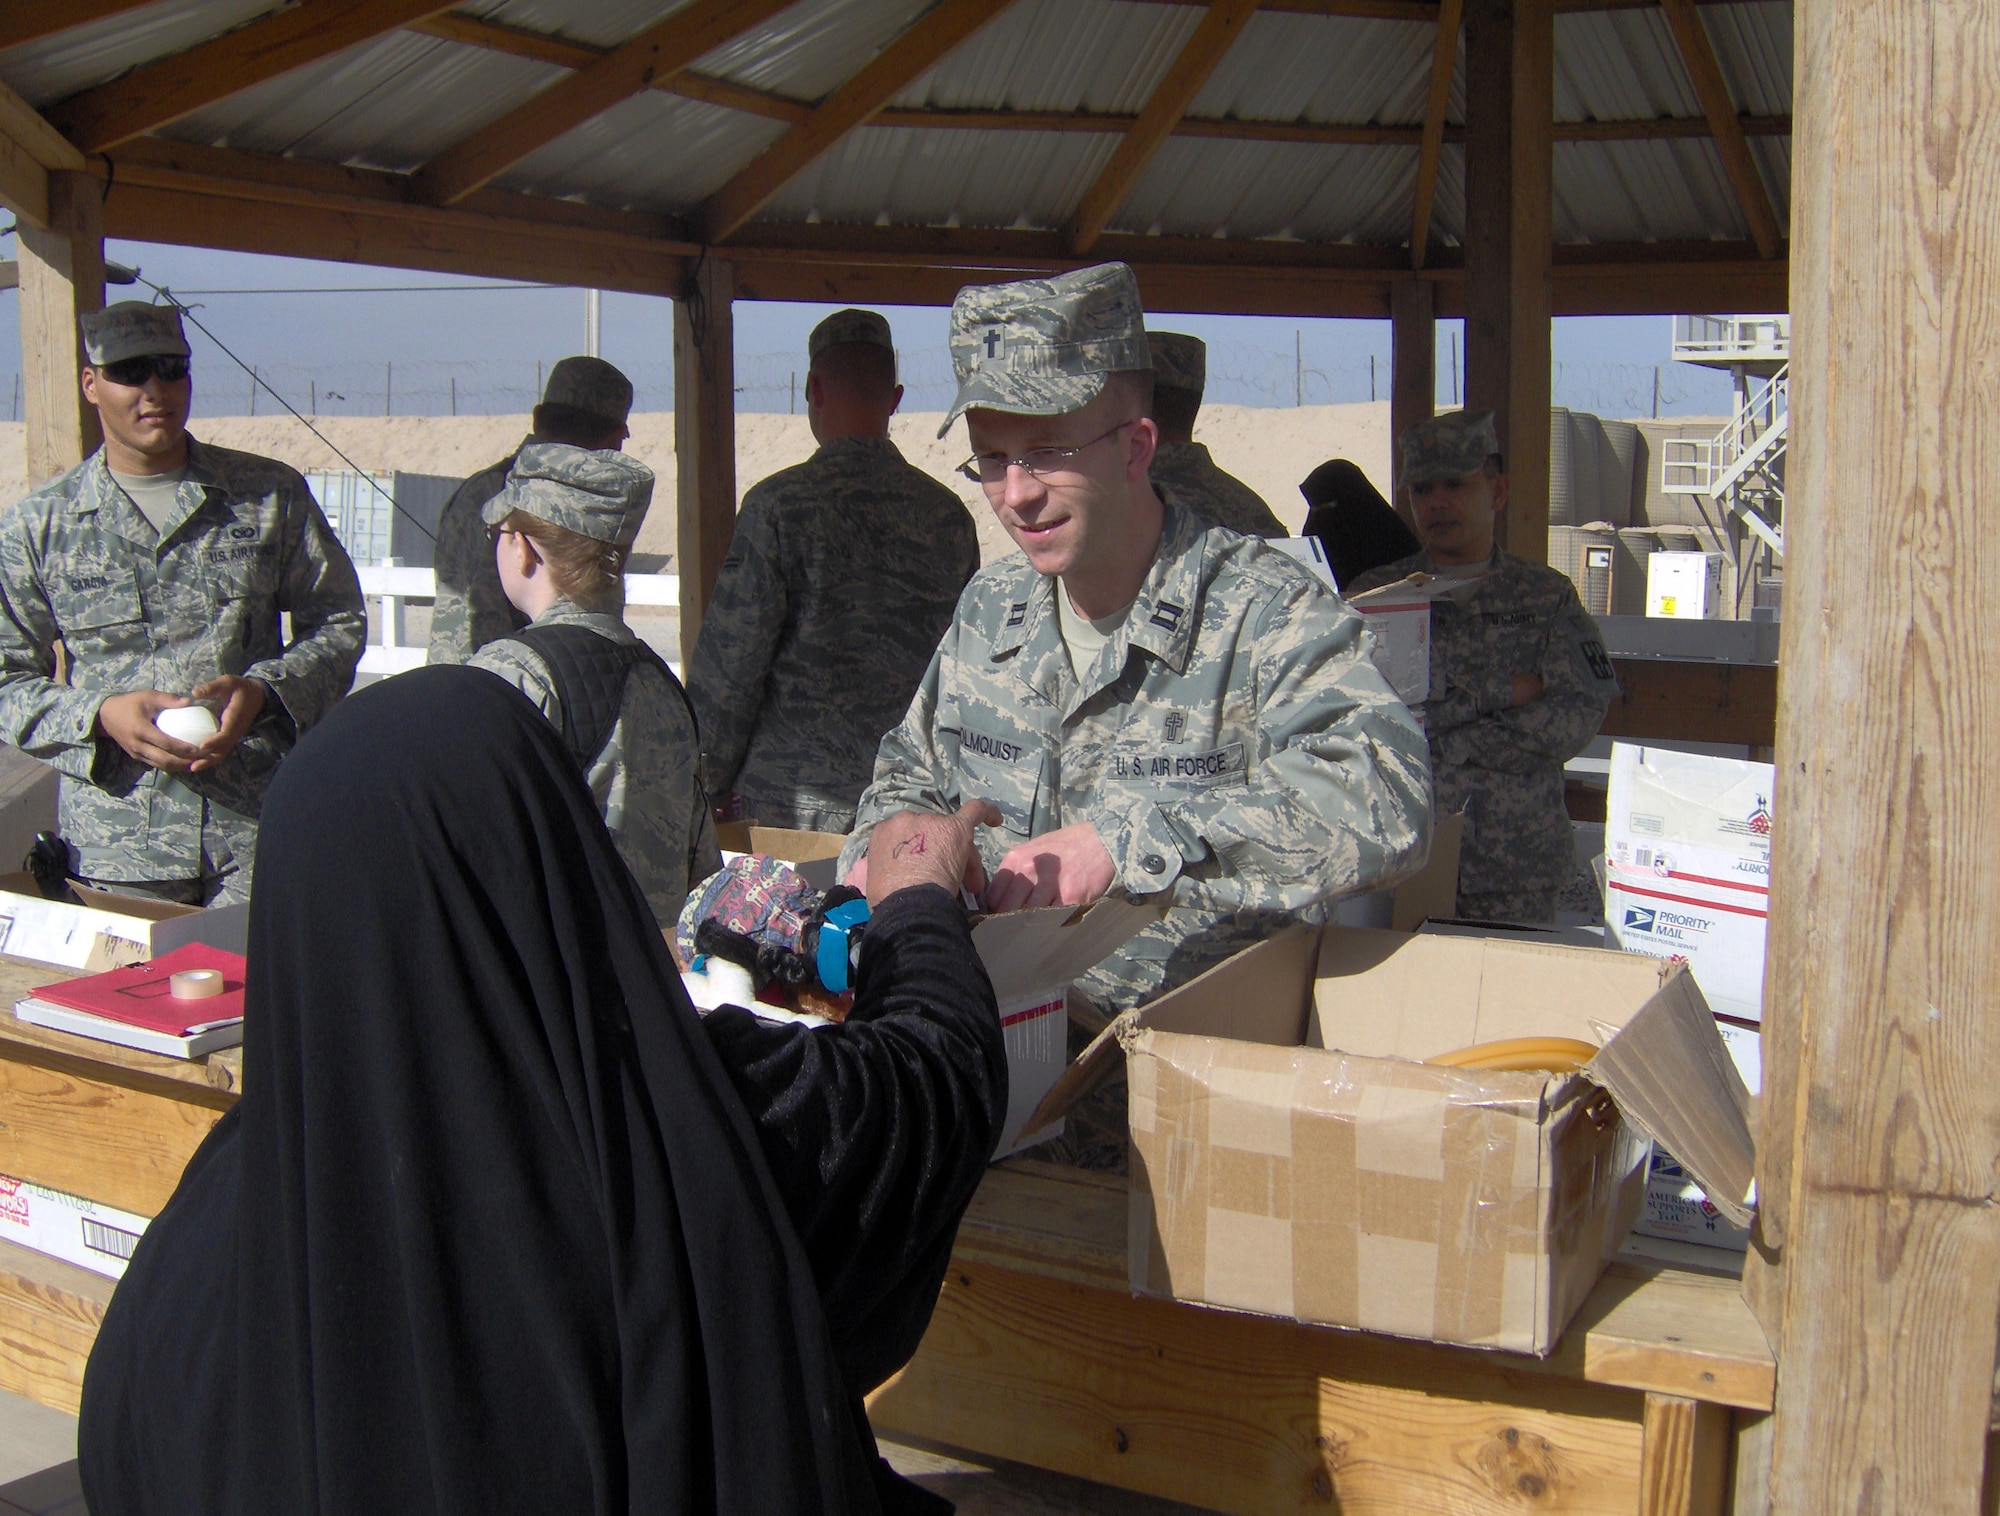 CAMP BUCCA, Iraq -- Chaplain (Capt.) Rolf Holmquist, 887th Expeditionary Secruity Forces Squadron chaplain, hands out care packages to Iraqi visitors. The chaplains office has given more than $180,000 worth of toys and hygiene products to more than 62,000 visitors in six months as part of the detainee visitation program. (U.S. Air Force photo by Staff Sgt. Jahn Espino)